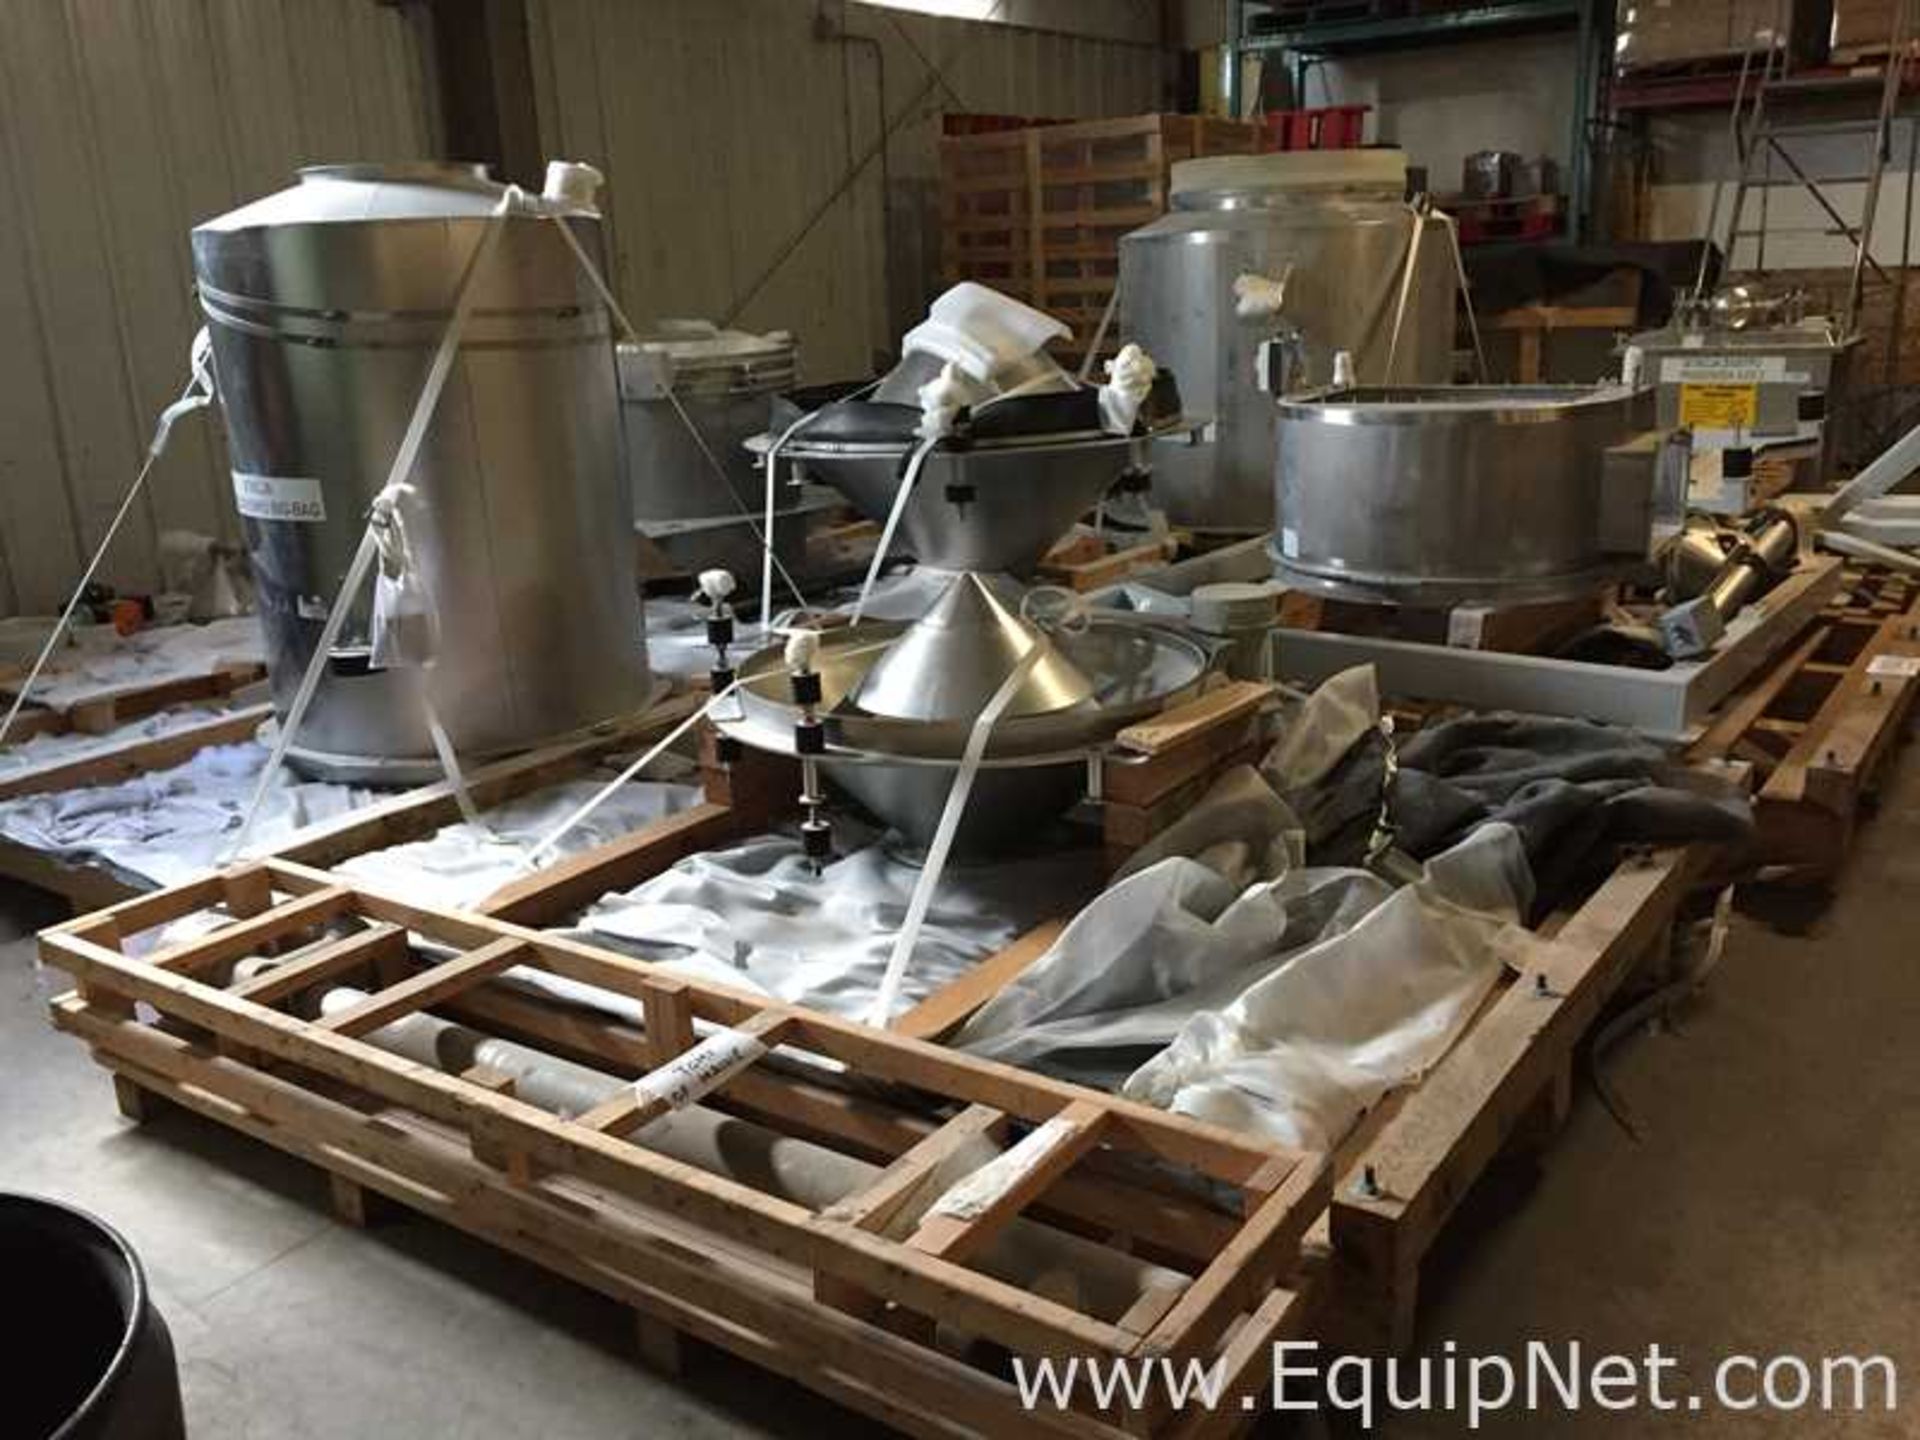 AZO Raw Material Production Equipment - Image 6 of 21